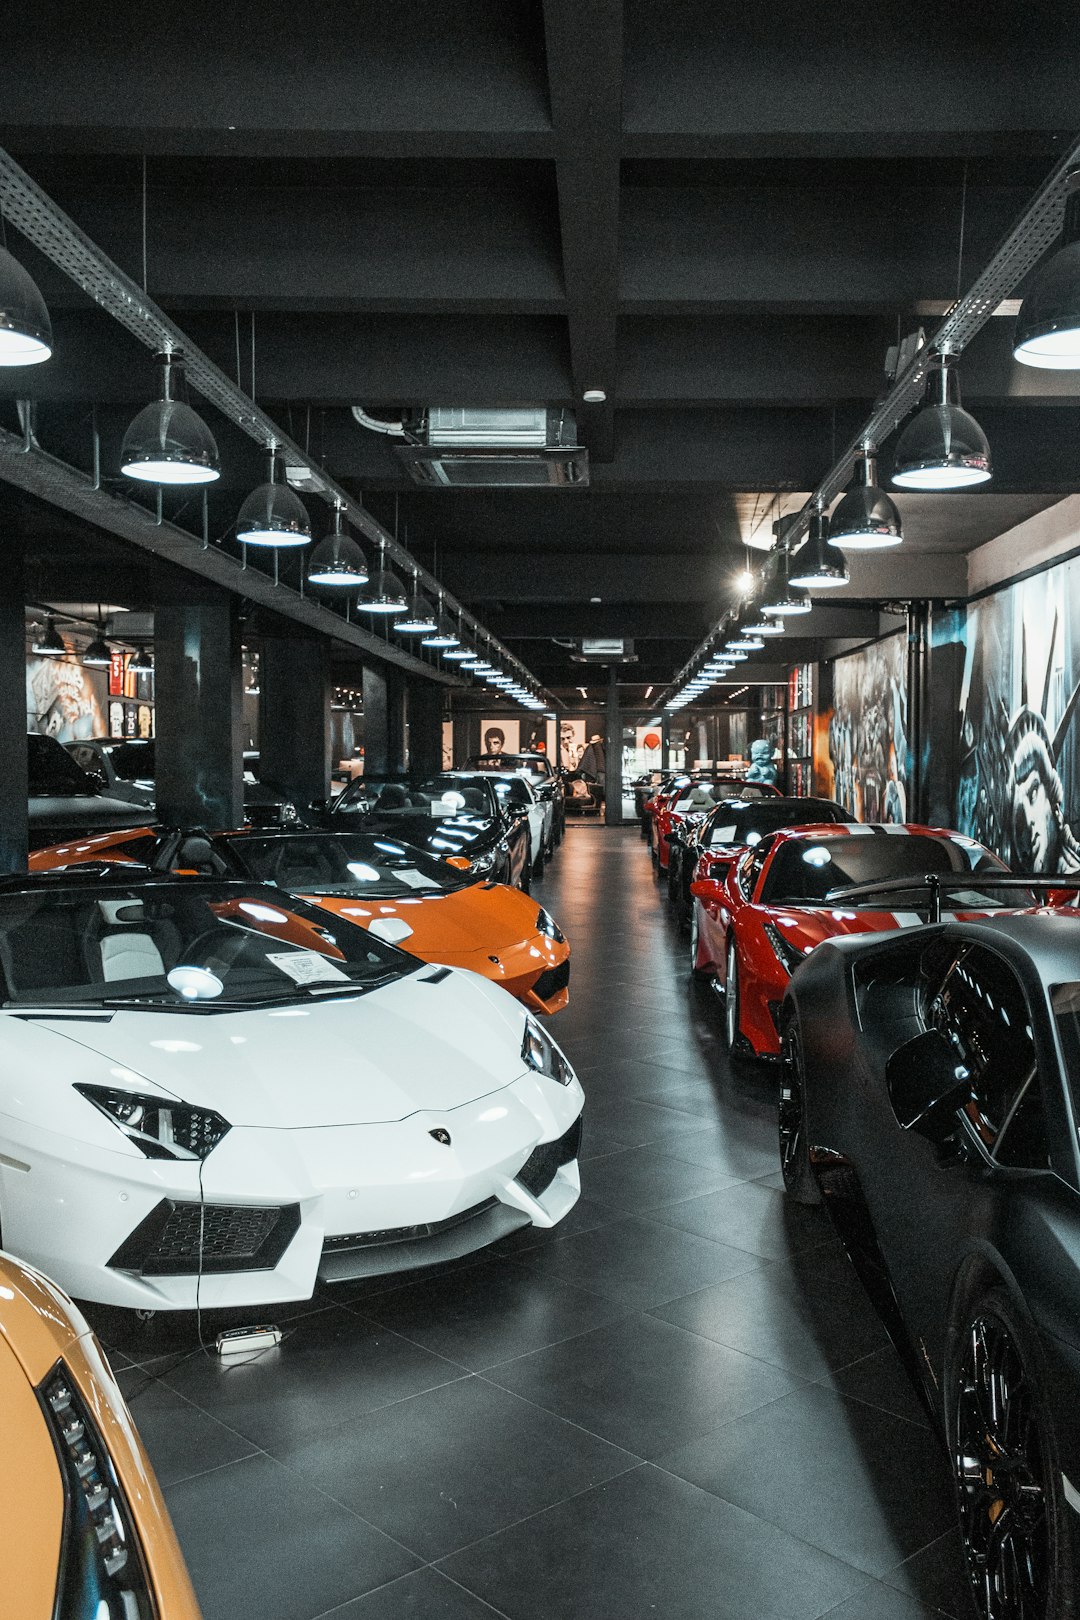 IMPROVING CAR DEALERSHIP SECURITY AND CONVENIENCE